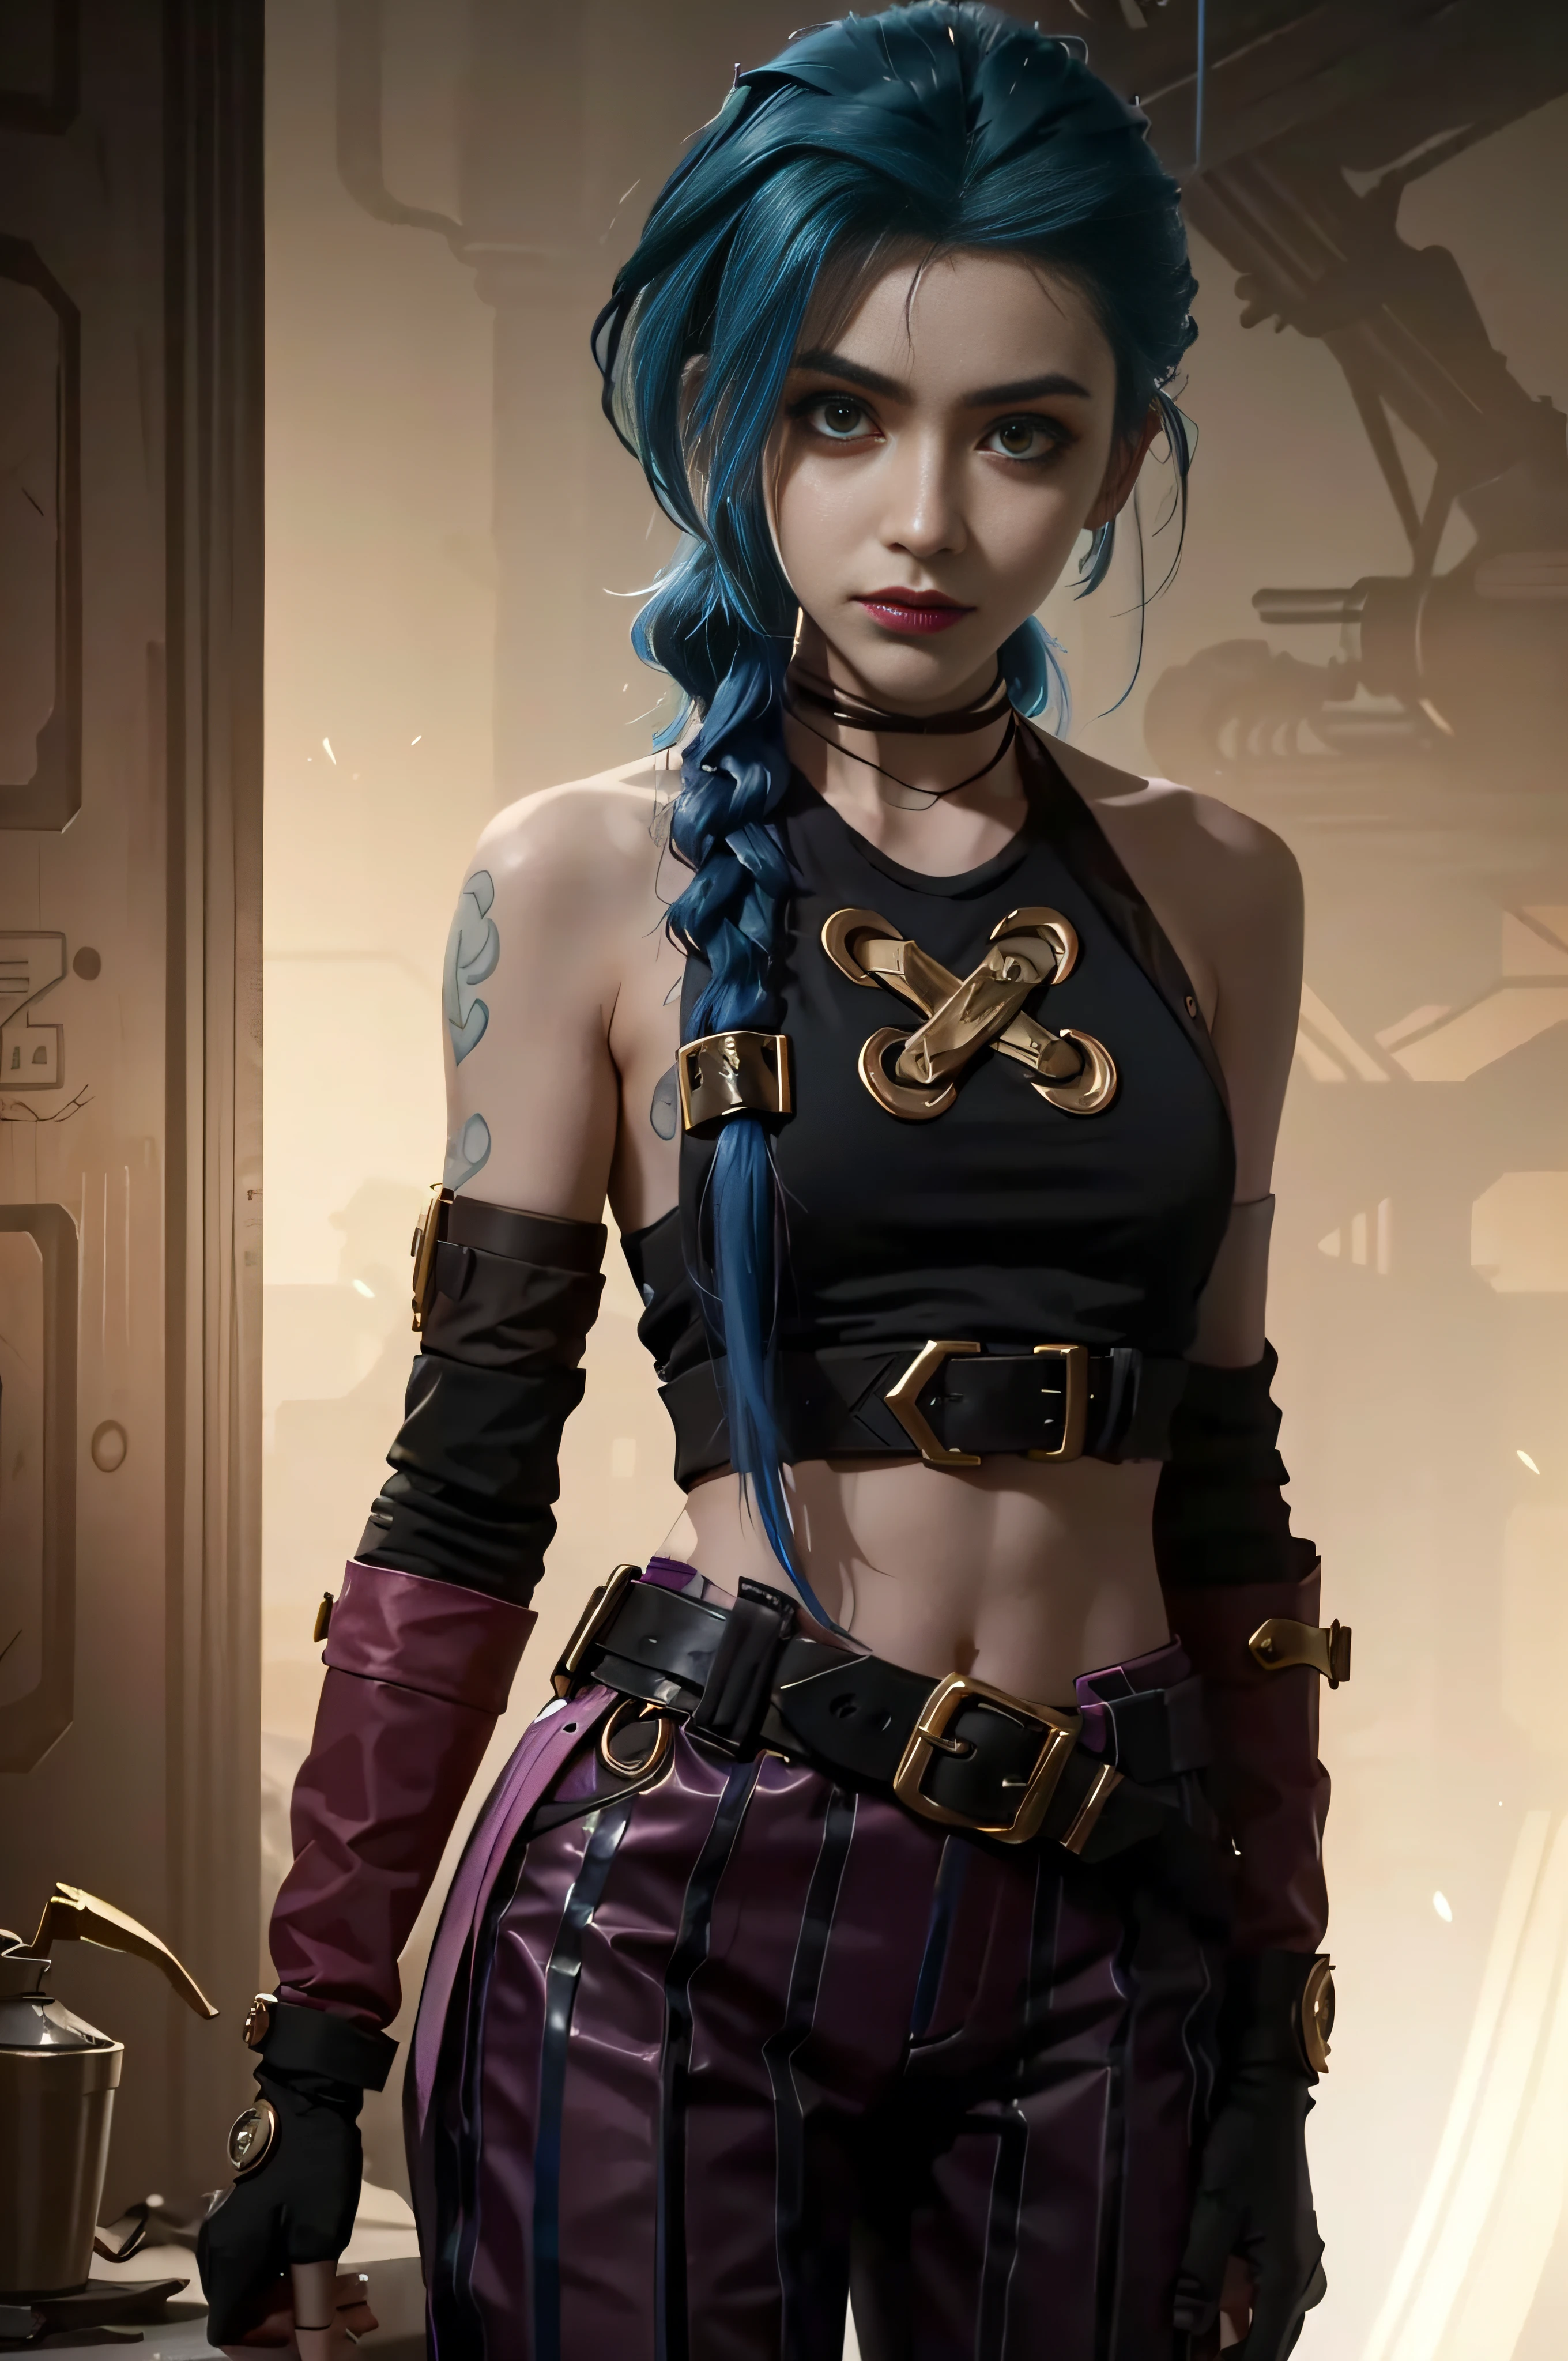 there is a woman with blue hair and a black top, portrait of jinx from arcane, jinx from arcane, jinx from league of legends, rococo cyberpunk, Cyberpunk Style ， Hyperrealistic, loba andrade from apex legends, ornamental gothic - cyberpunk, Hyper-realistic cyberpunk style, portrait of lady mechanika, alice in wonderland cyberpunk, Vivid steampunk concept